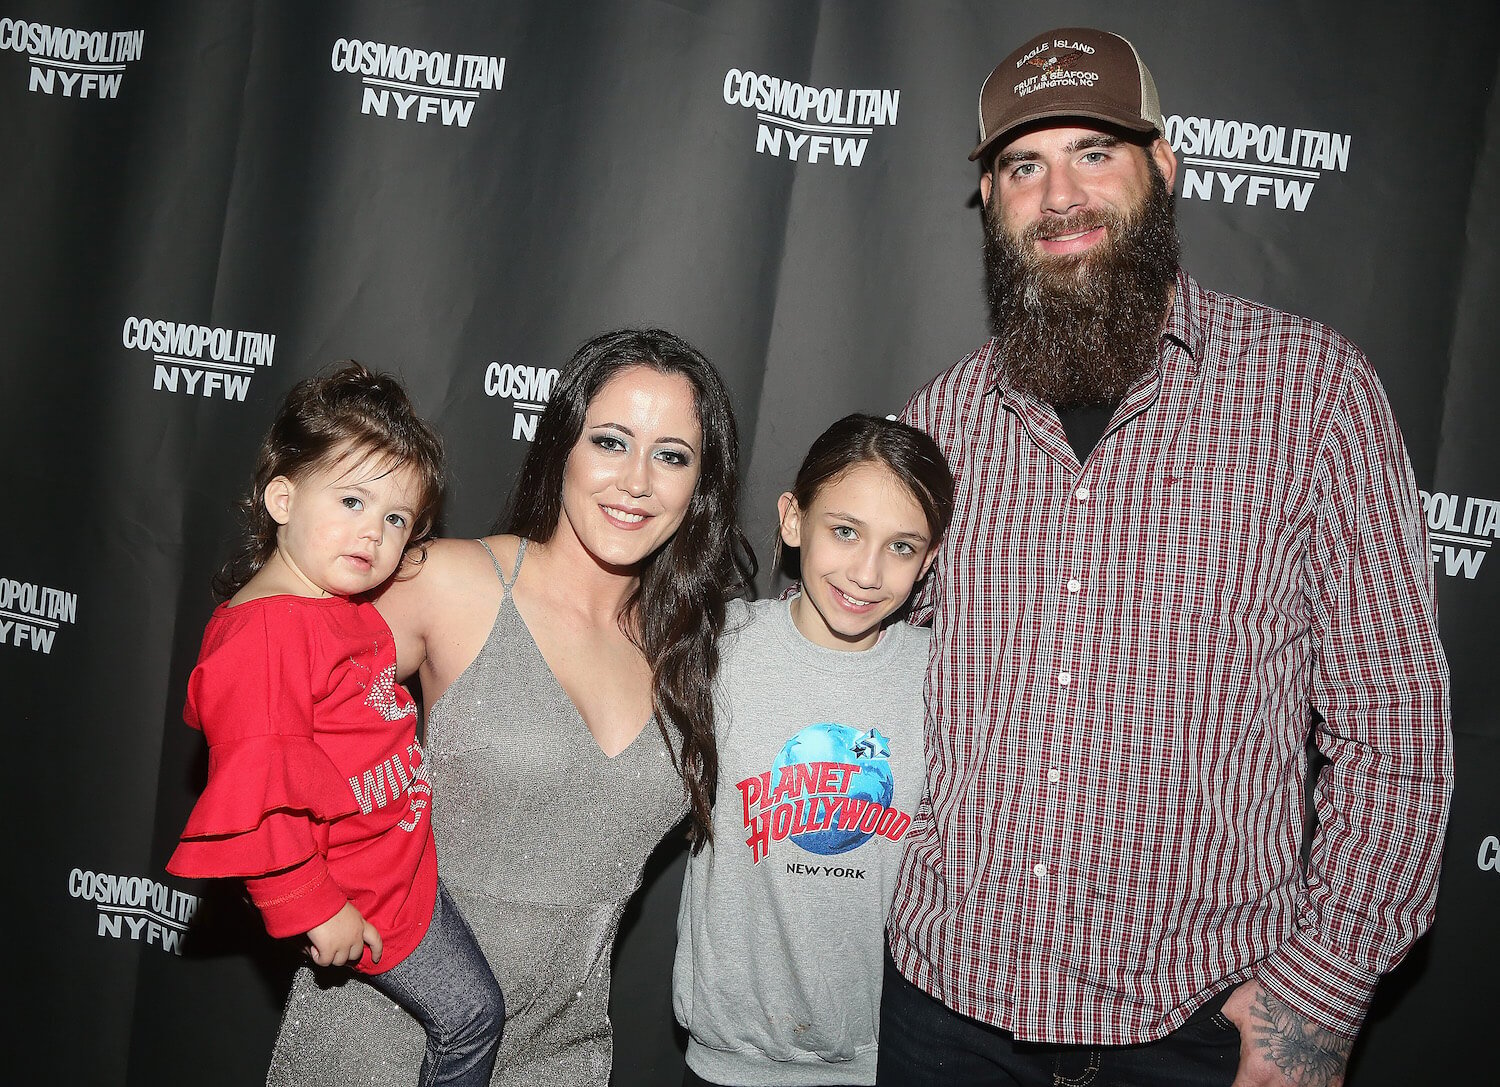 Ensley Jolie Eason, 'Teen Mom 2' star Janelle Evans, Maryssa Eason, and David Eason standing next to each other and smiling at an event